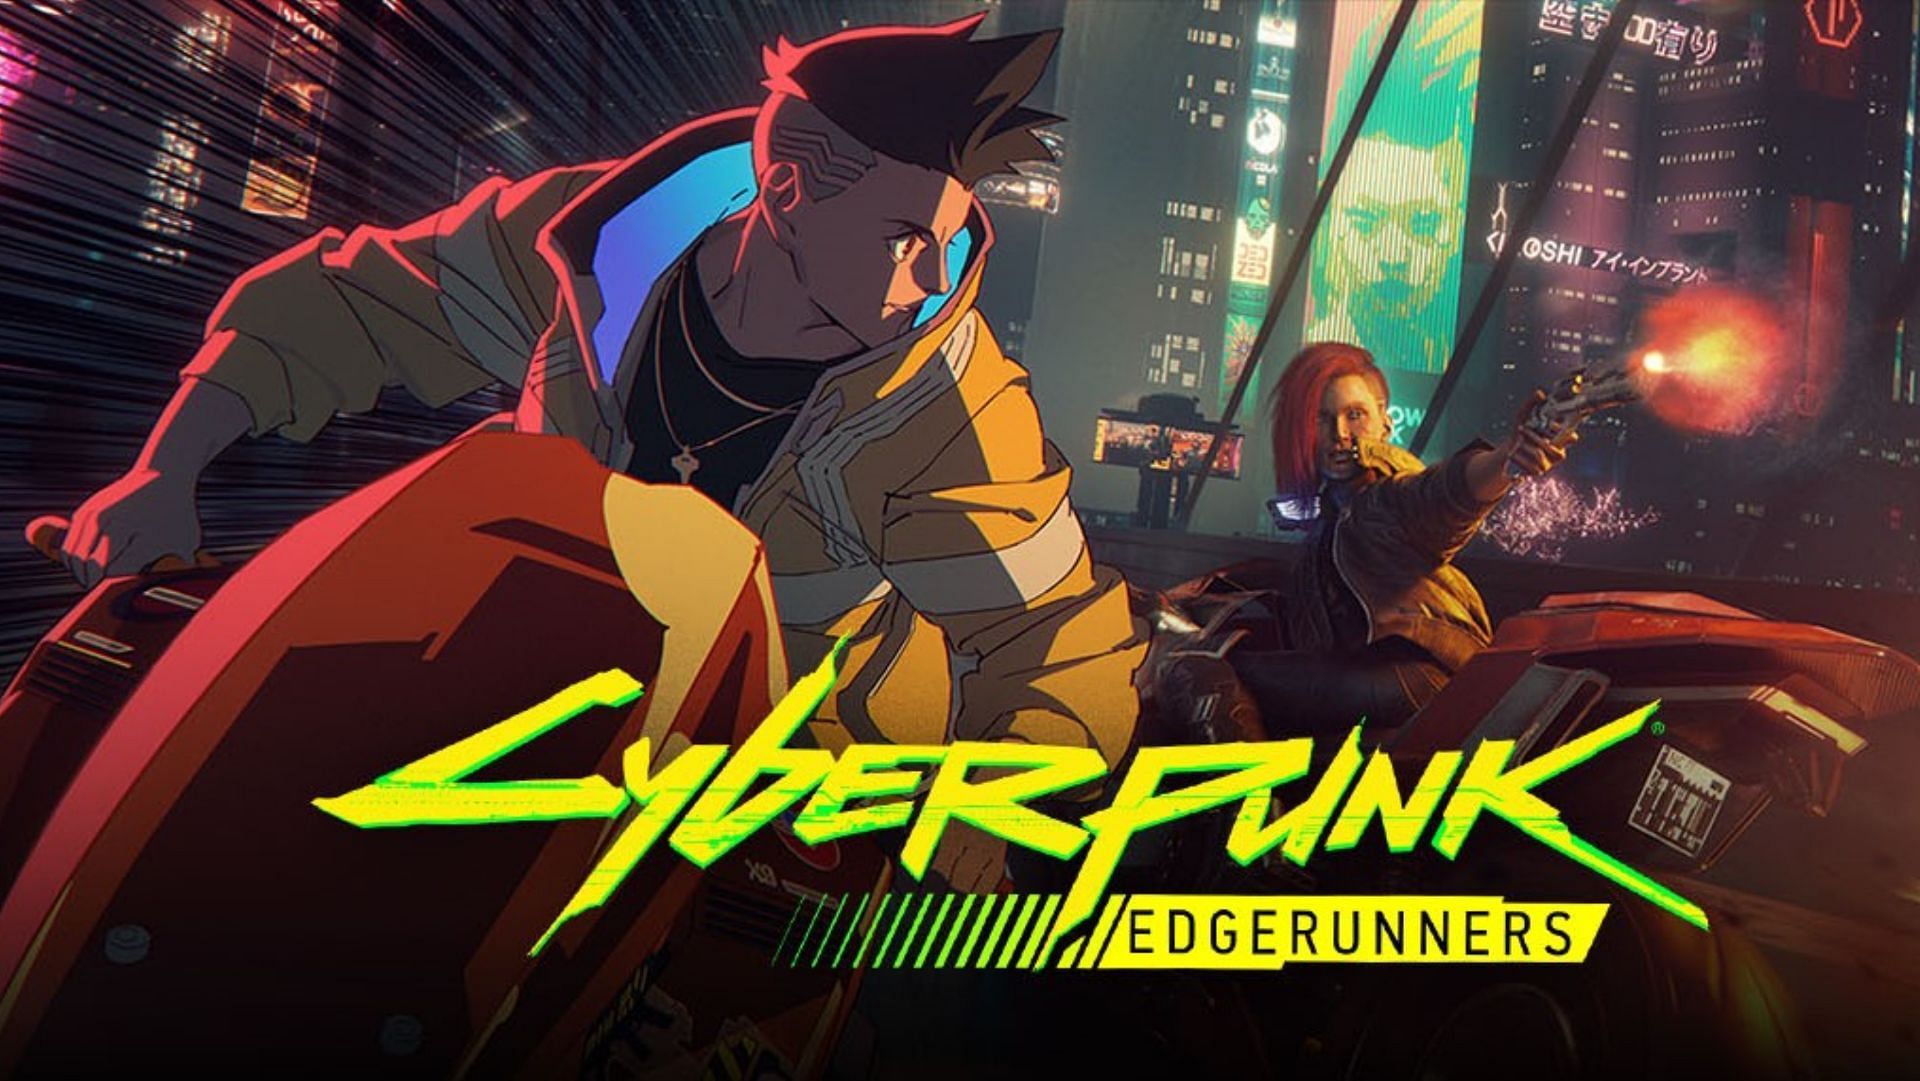 Cyberpunk 2077 Adds Edgerunners Content Including New Cosmetics From Upcoming Show And More 7459